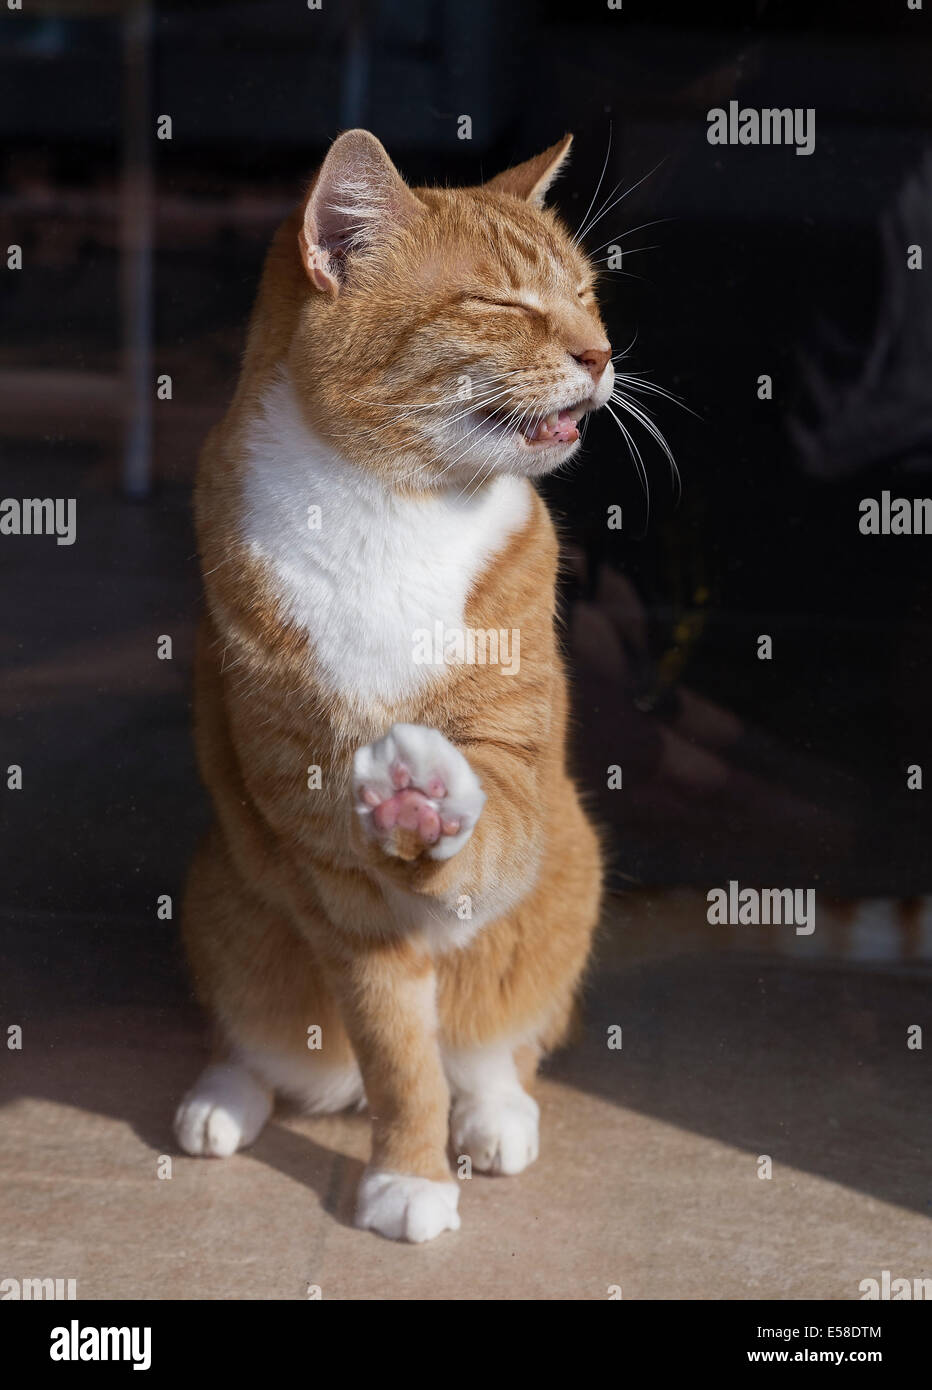 Orange tabby cat crying at a glass door. Stock Photo